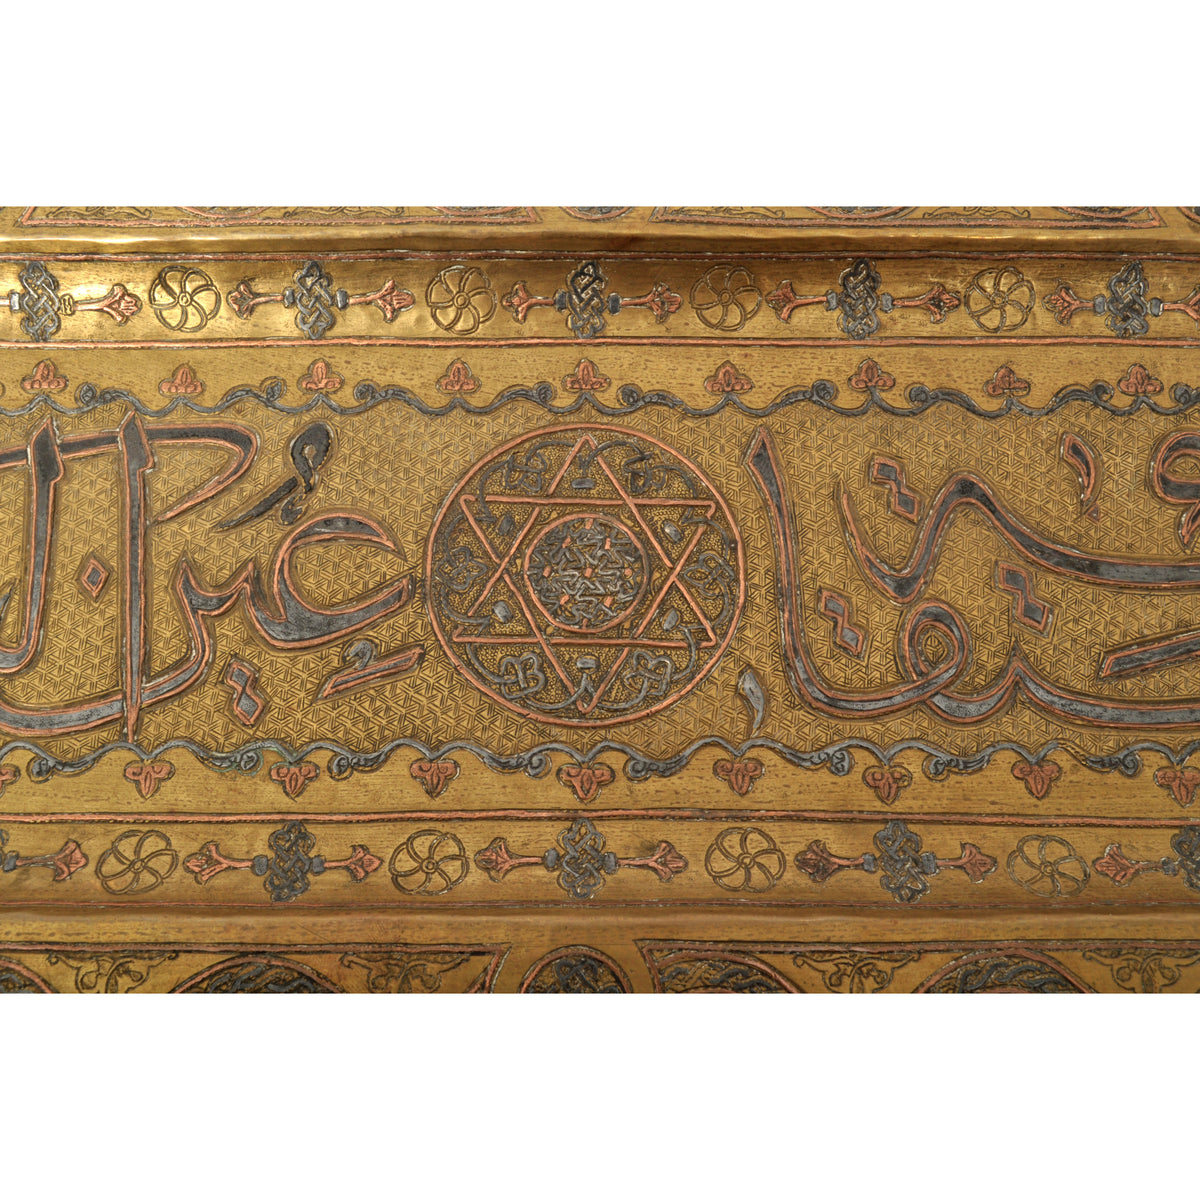 Large Antique Islamic Mamluk Revival Inlaid Silver Calligraphy Copper Tray Circa 1880